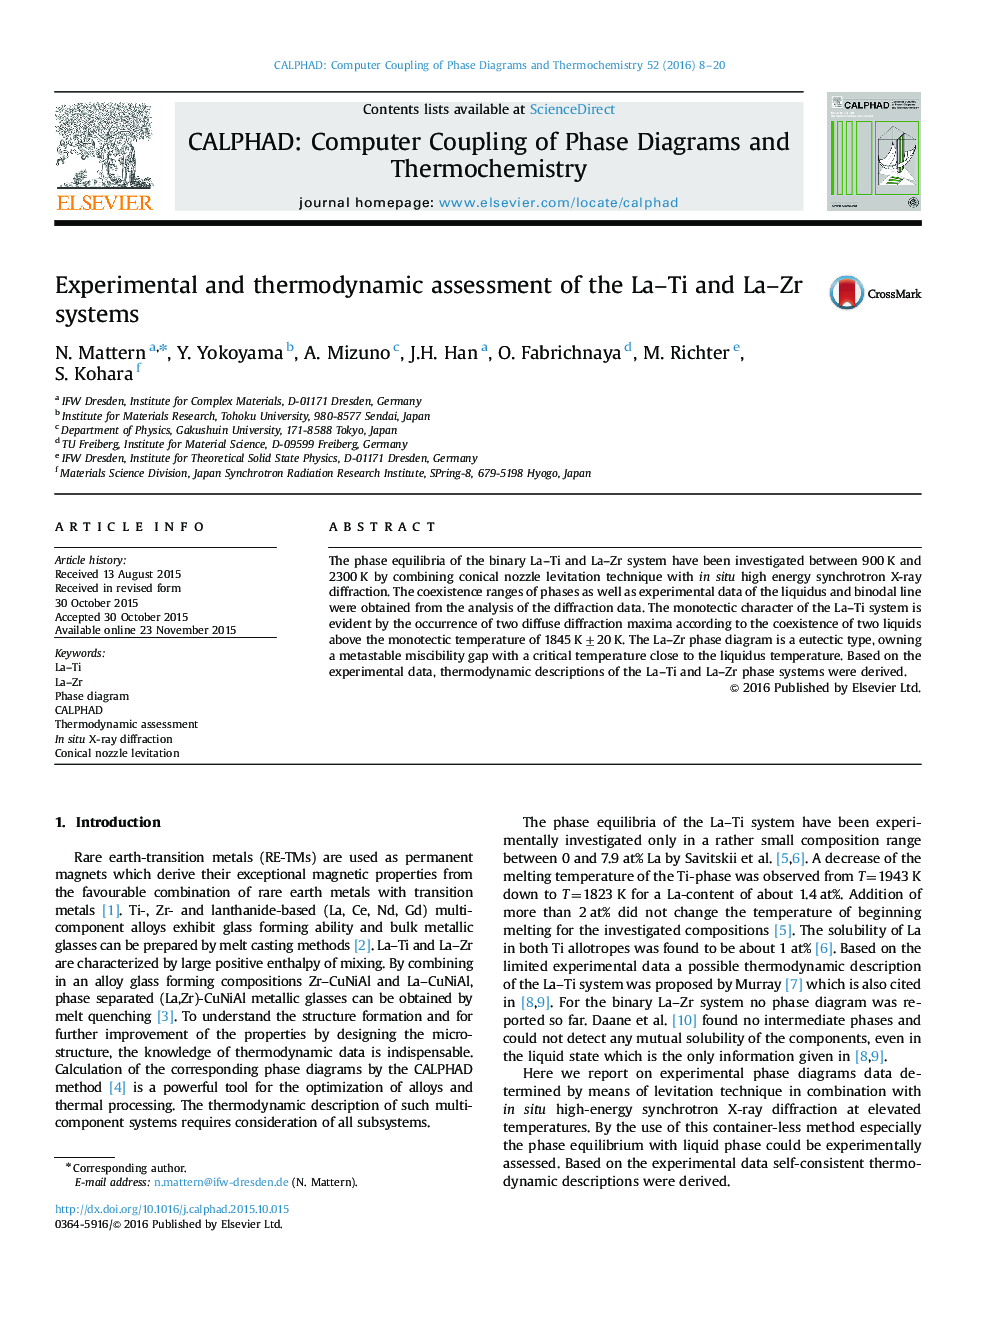 Experimental and thermodynamic assessment of the La-Ti and La-Zr systems